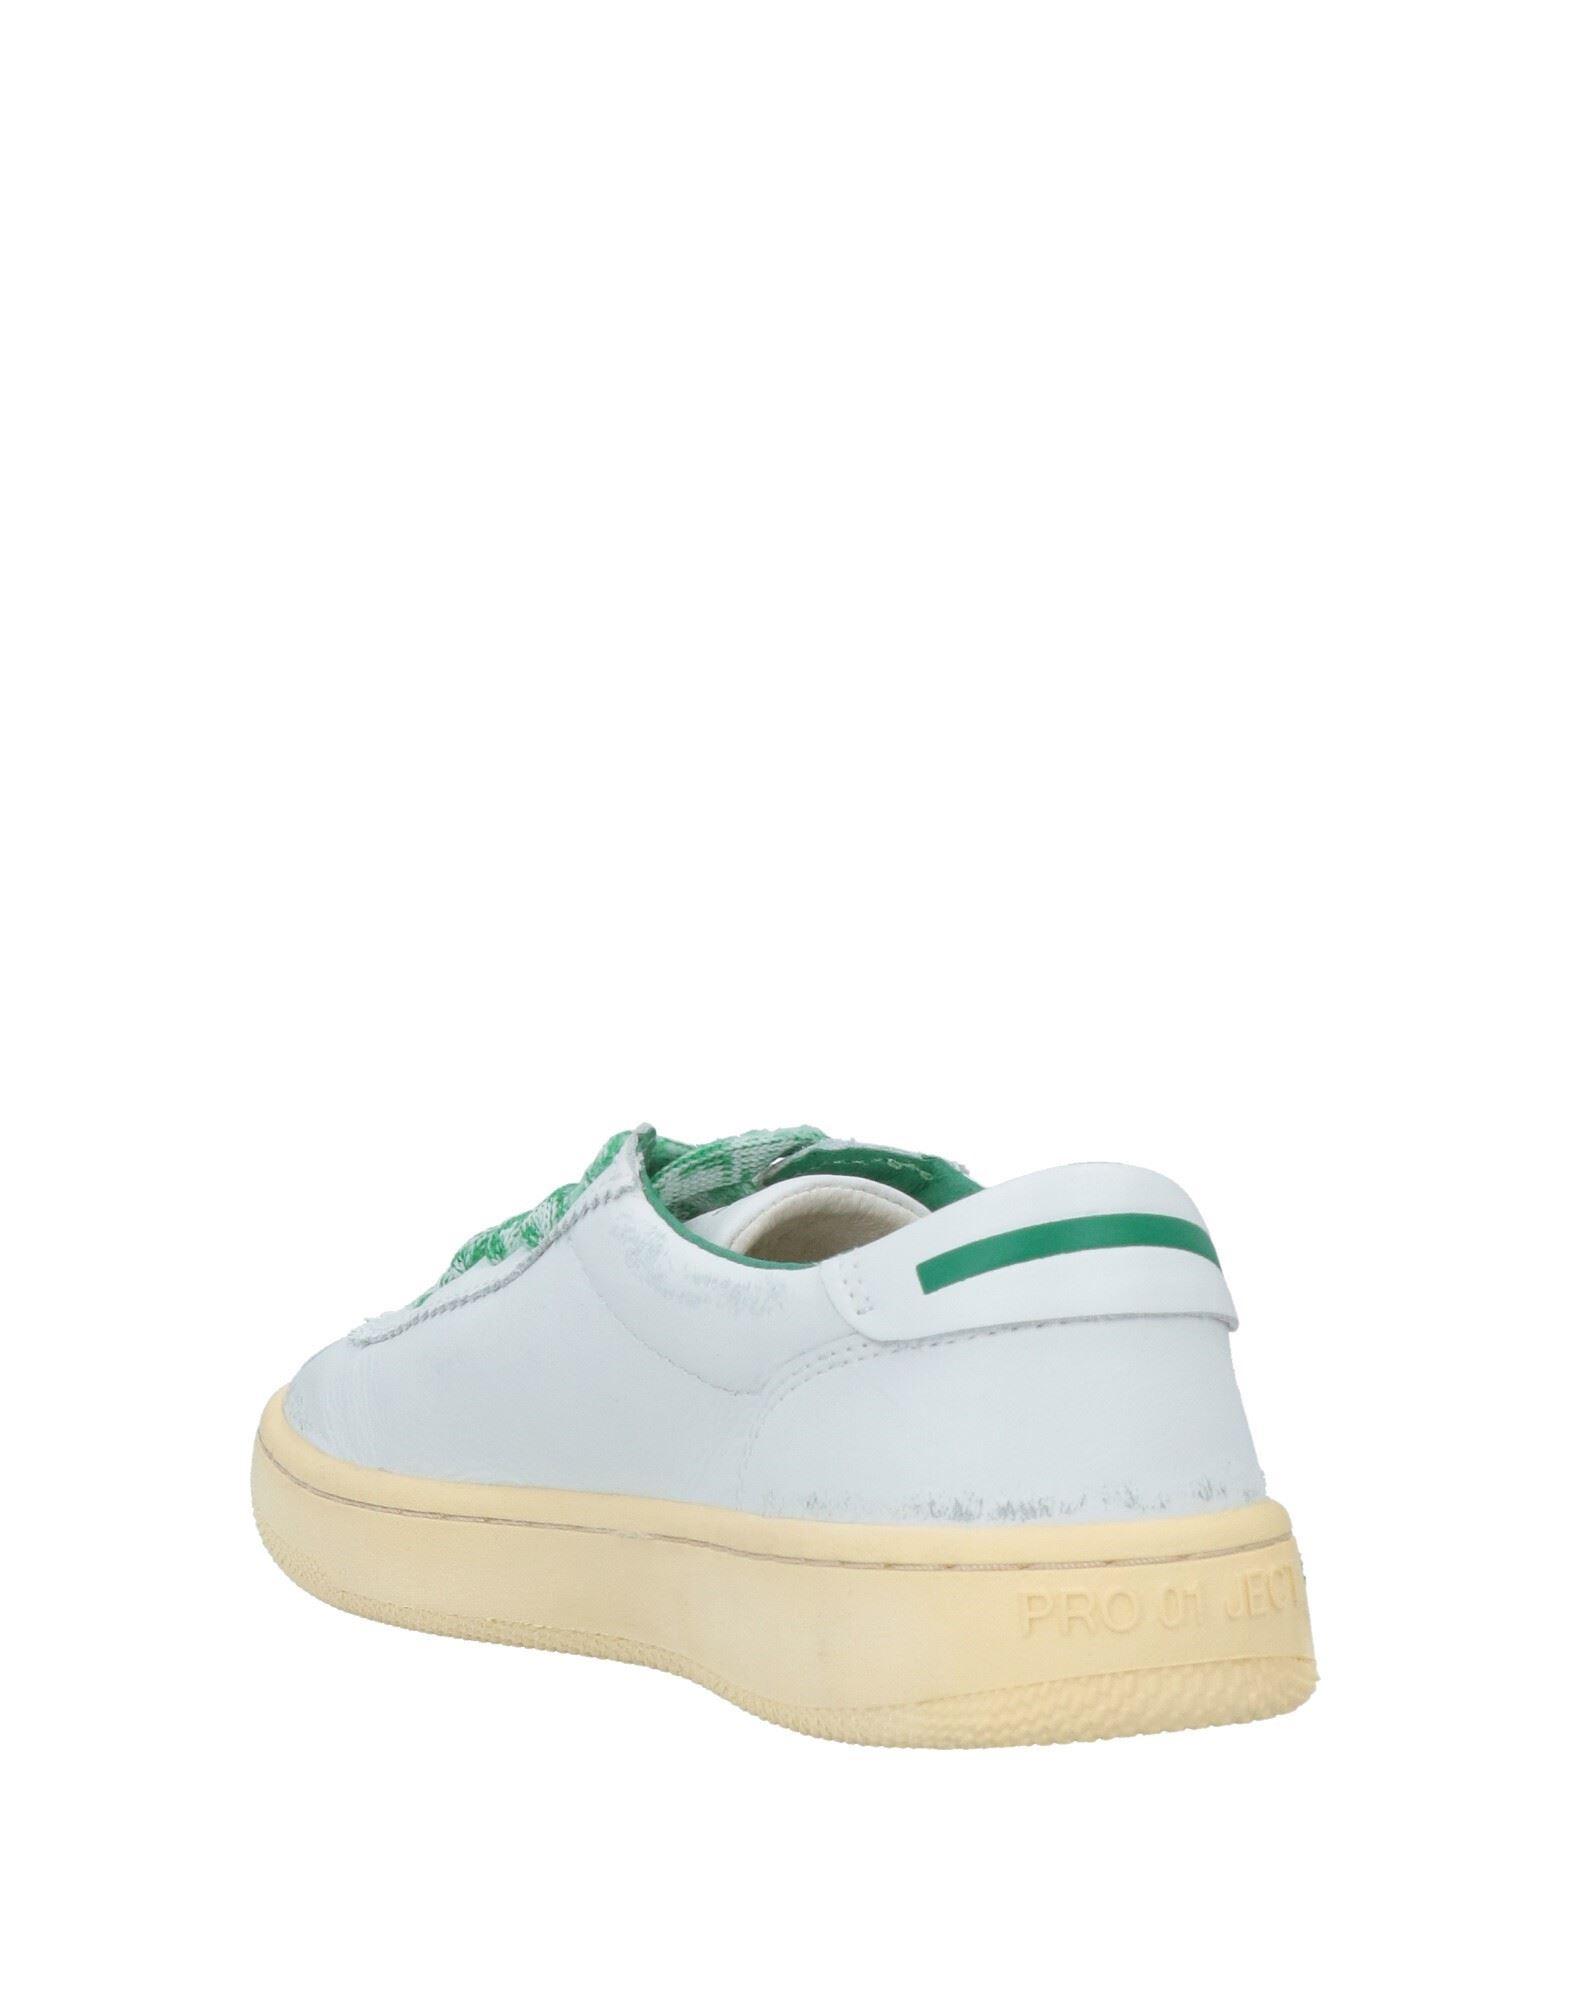 PRO 01 JECT Trainers in Green | Lyst